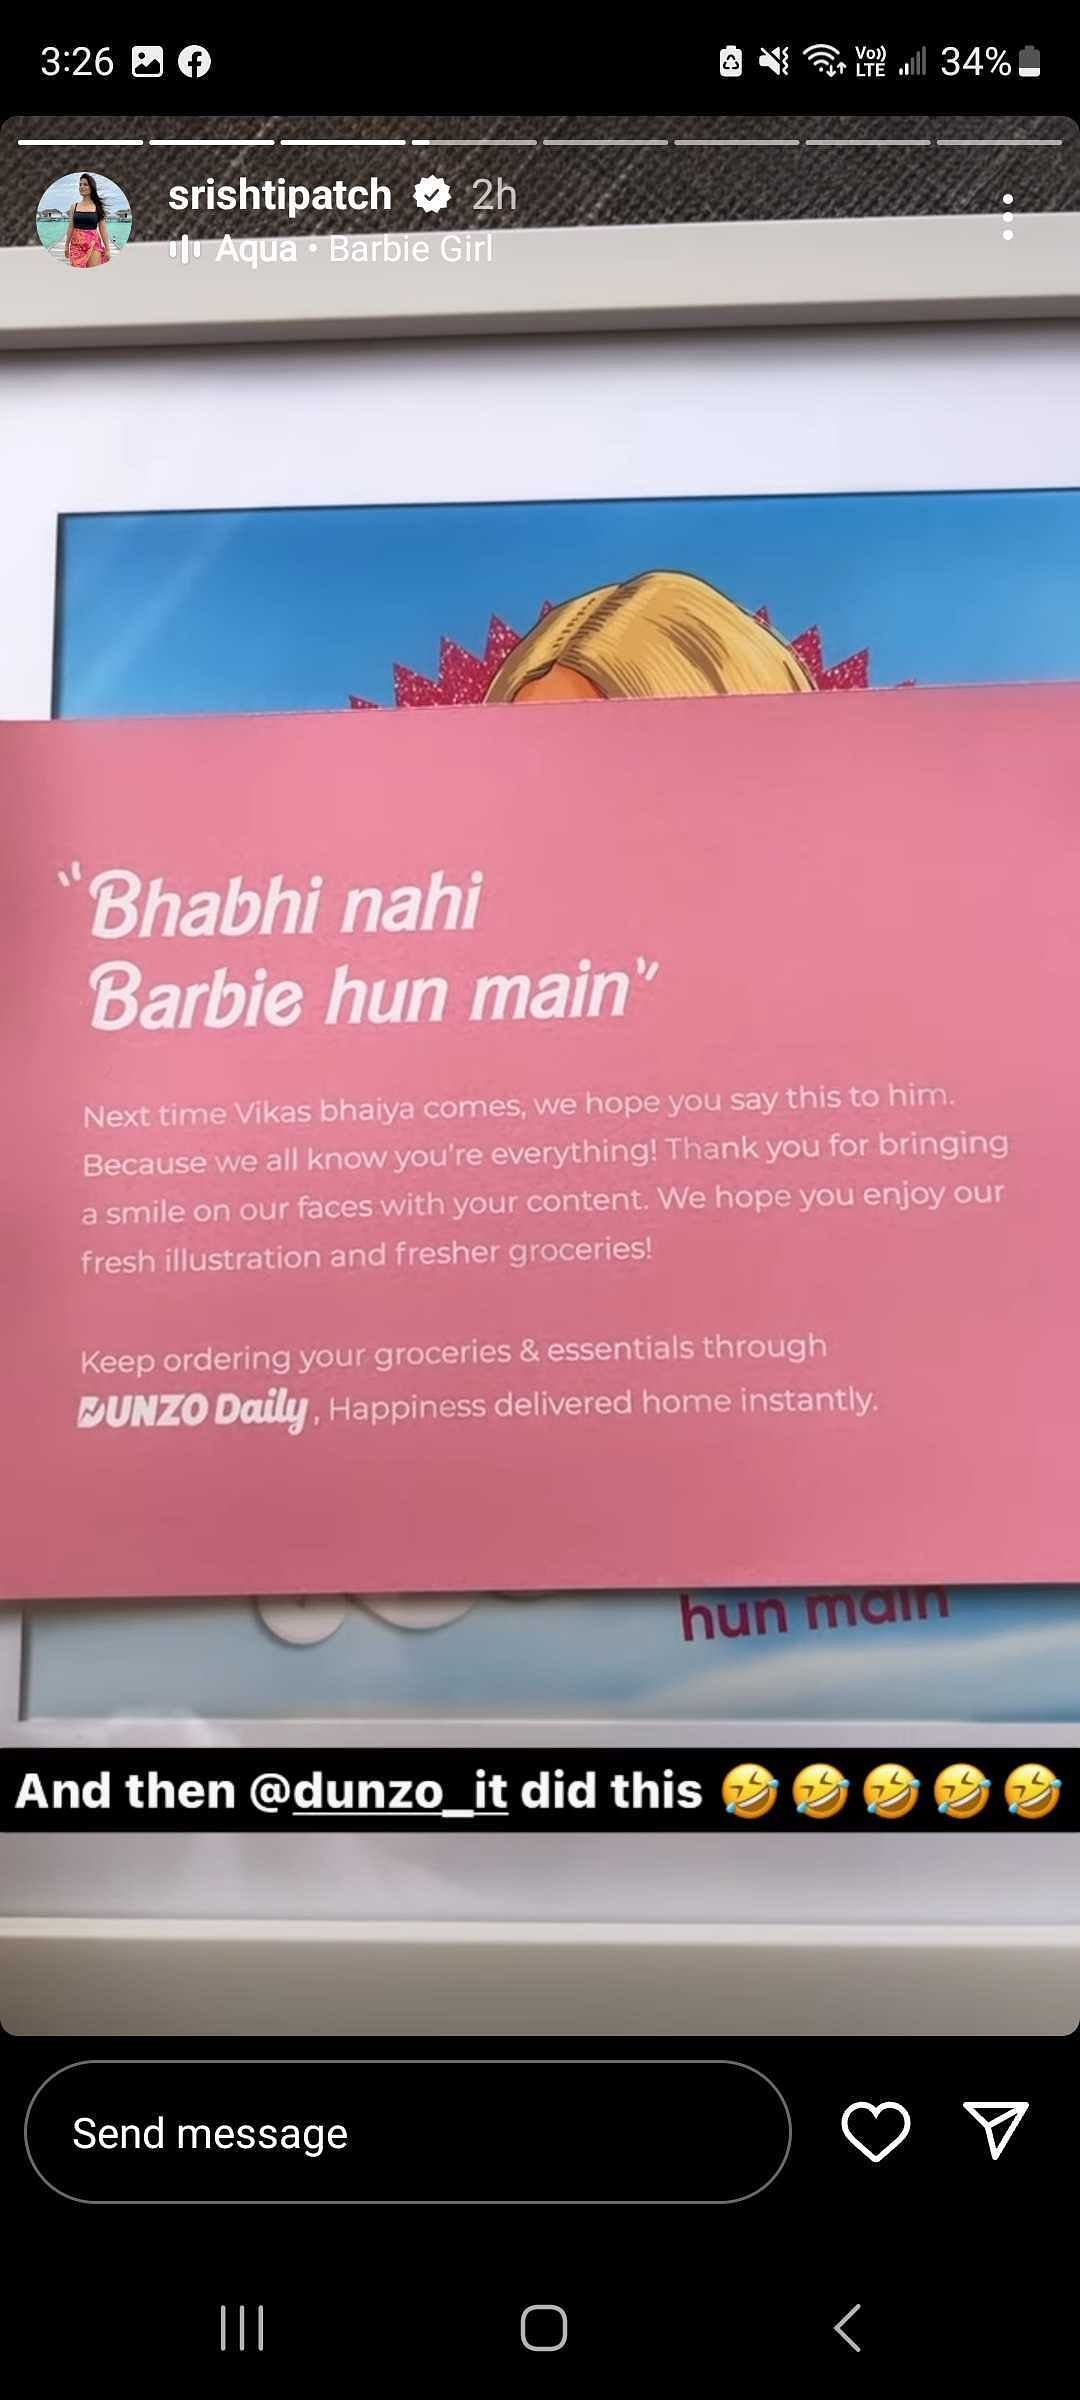 Dunzo Daily delivers customised Barbie boxes in a supposed collab with Srishti Dixit